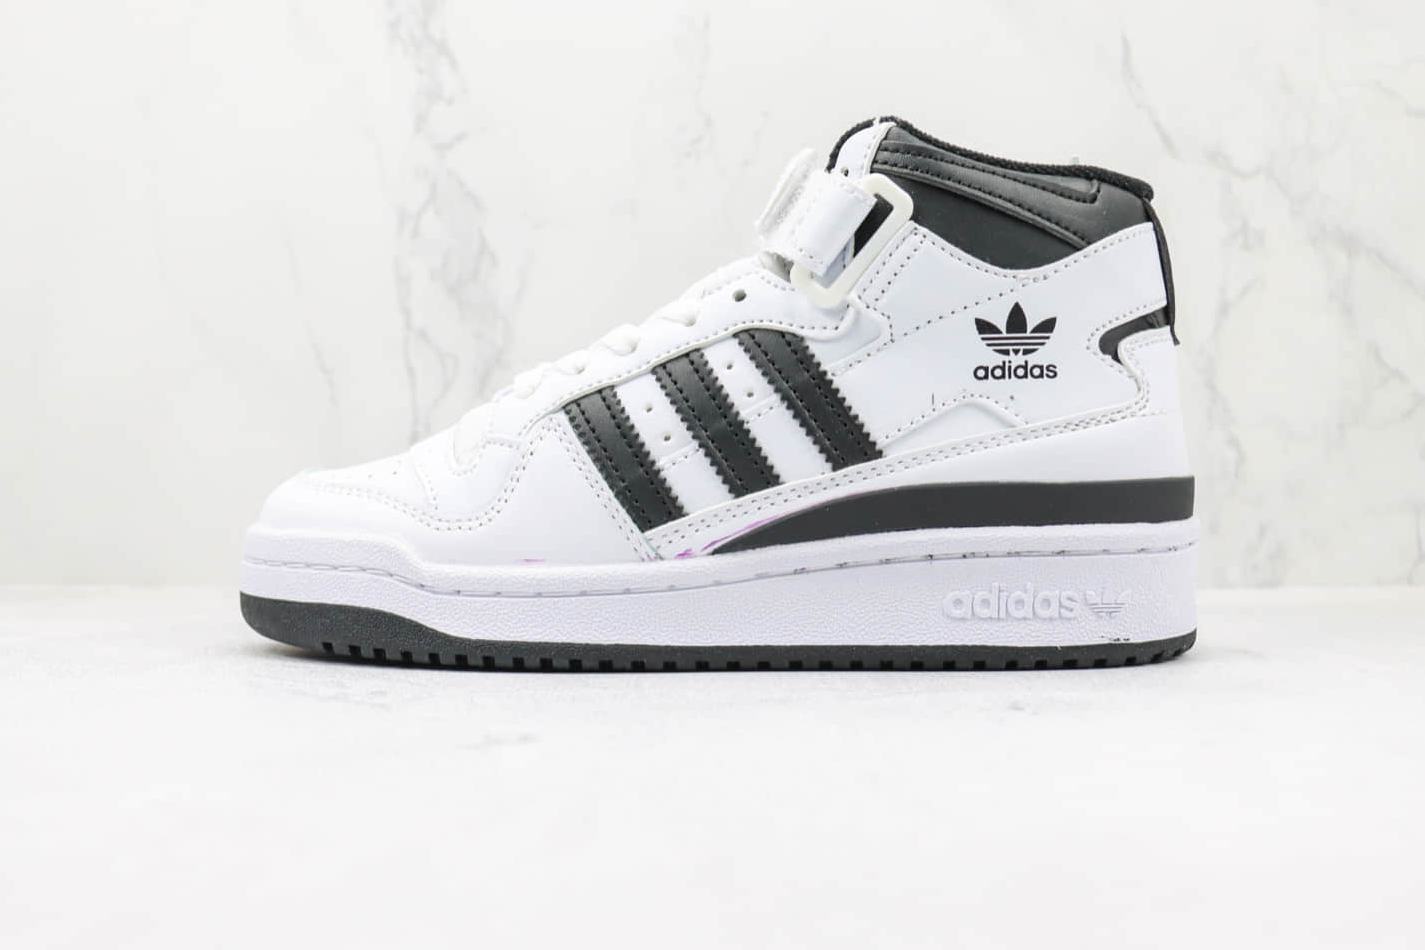 Adidas Forum Mid 'White Black' FY7939 - Classic Style and Versatility